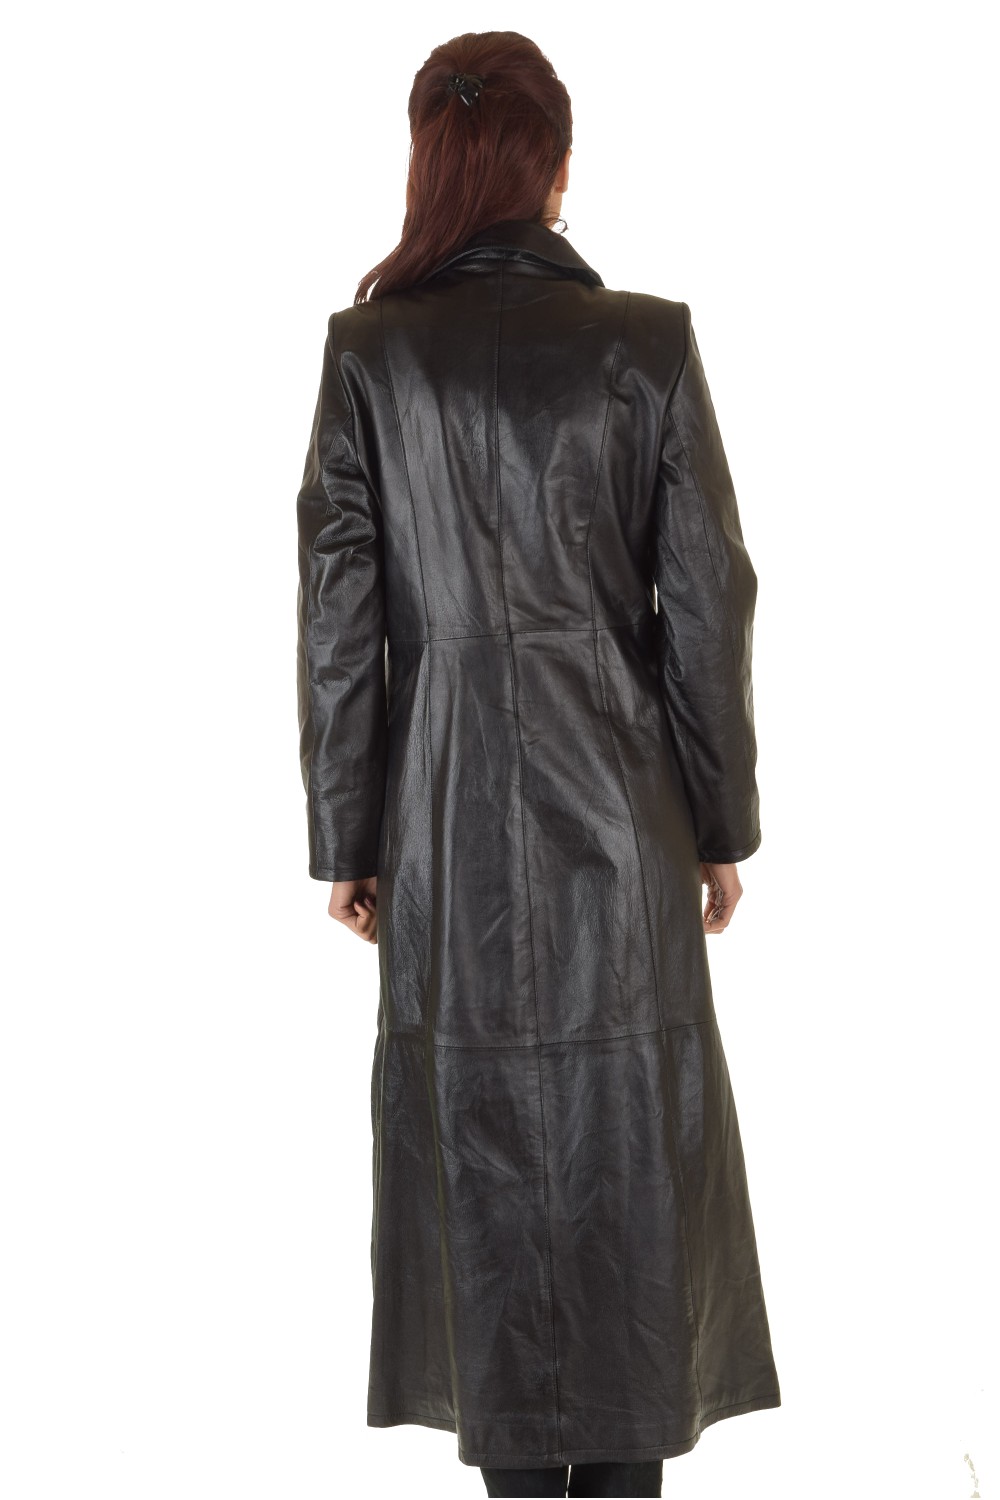 Leather trenchcoat | furlando - leather and fur.